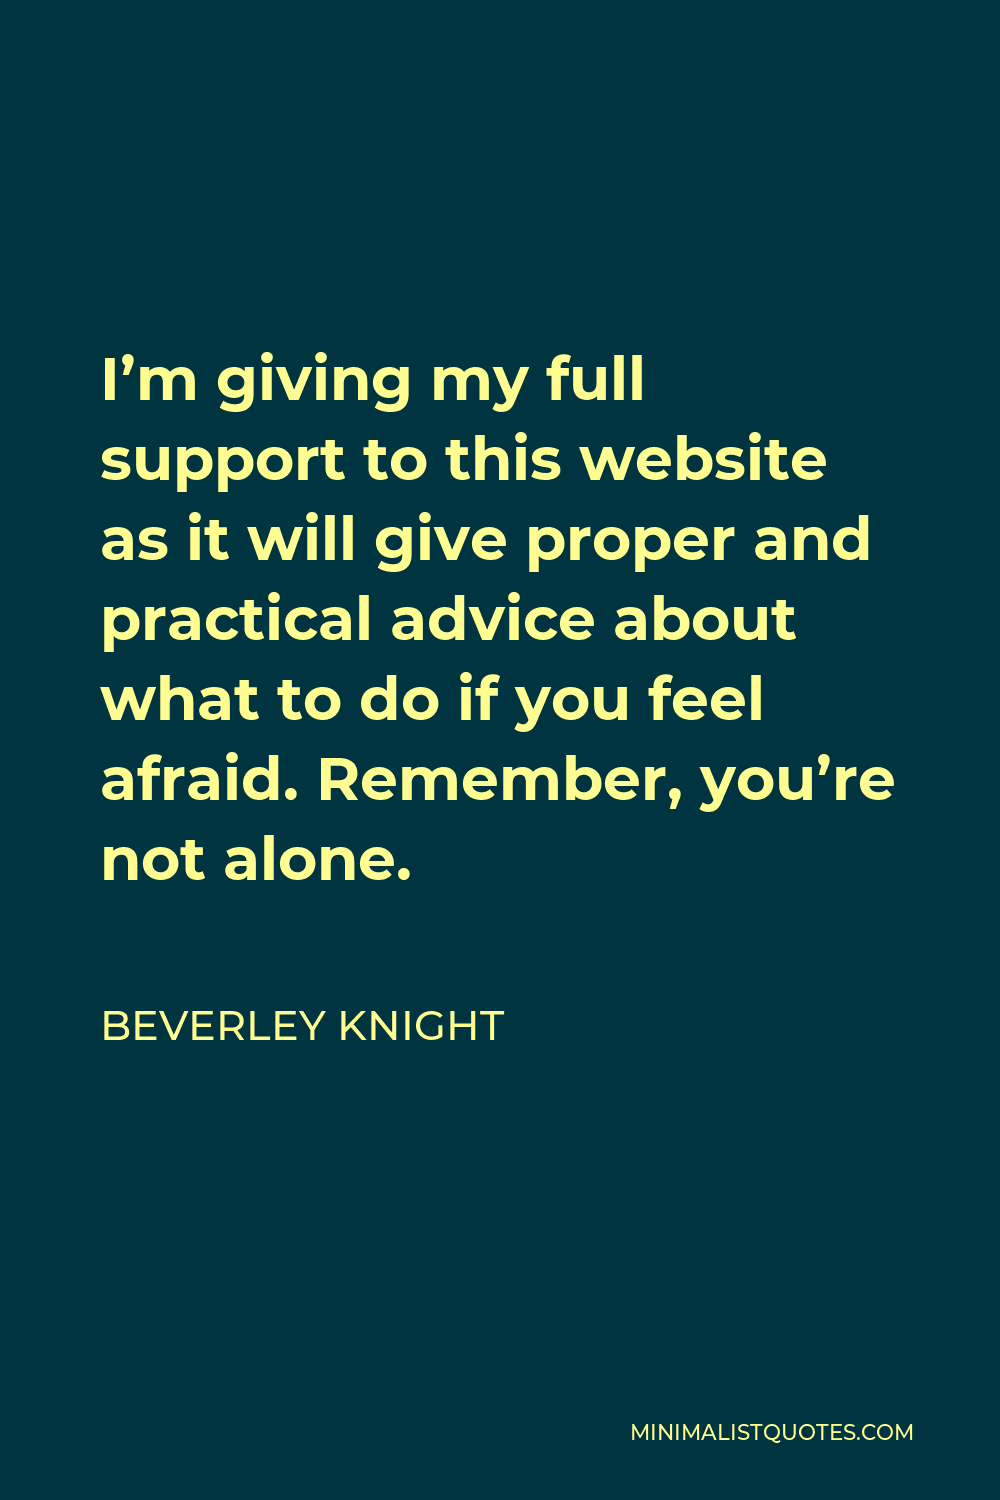 Beverley Knight Quote - I’m giving my full support to this website as it will give proper and practical advice about what to do if you feel afraid. Remember, you’re not alone.